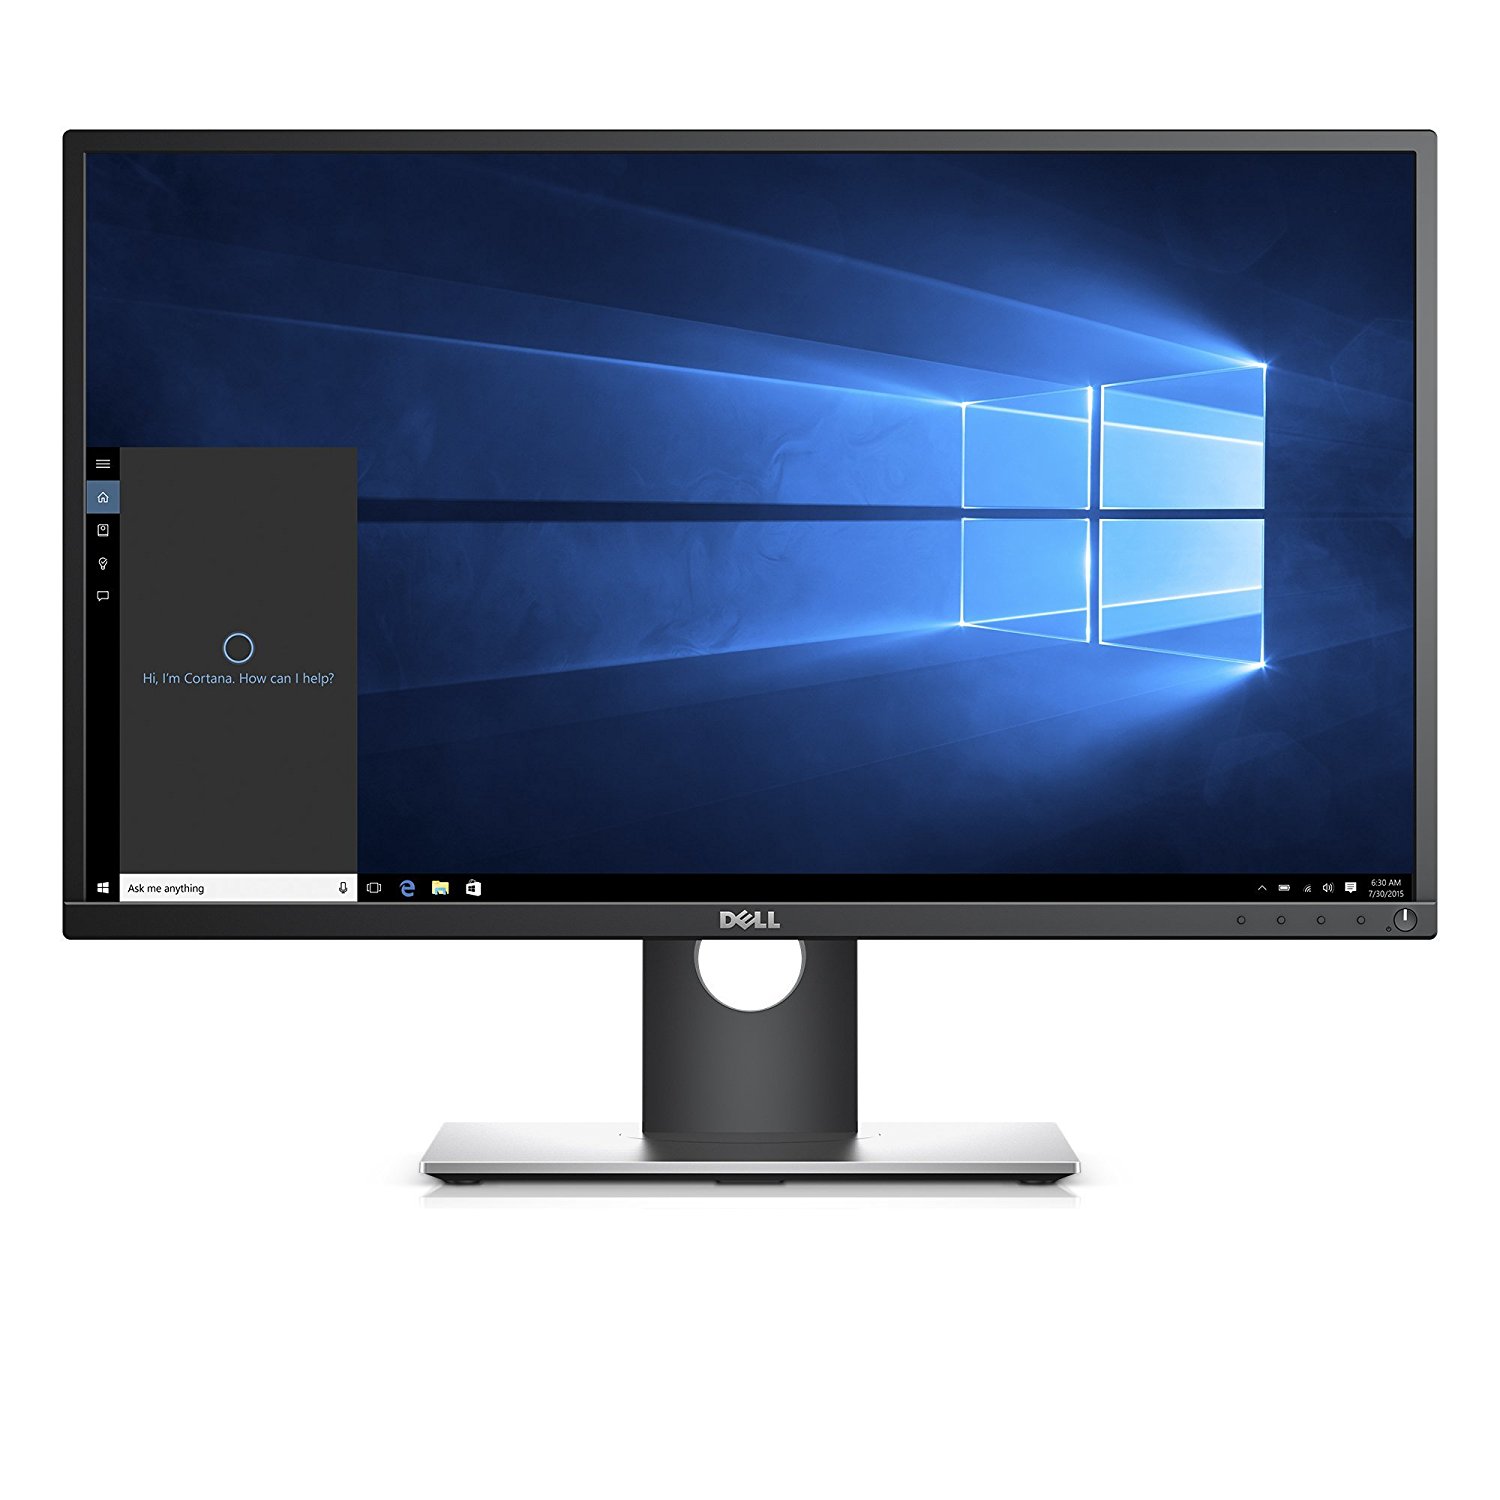 Dell P2217H 21.5" LED LCD Monitor - 16:9 - 6 ms - 1920 x 1080